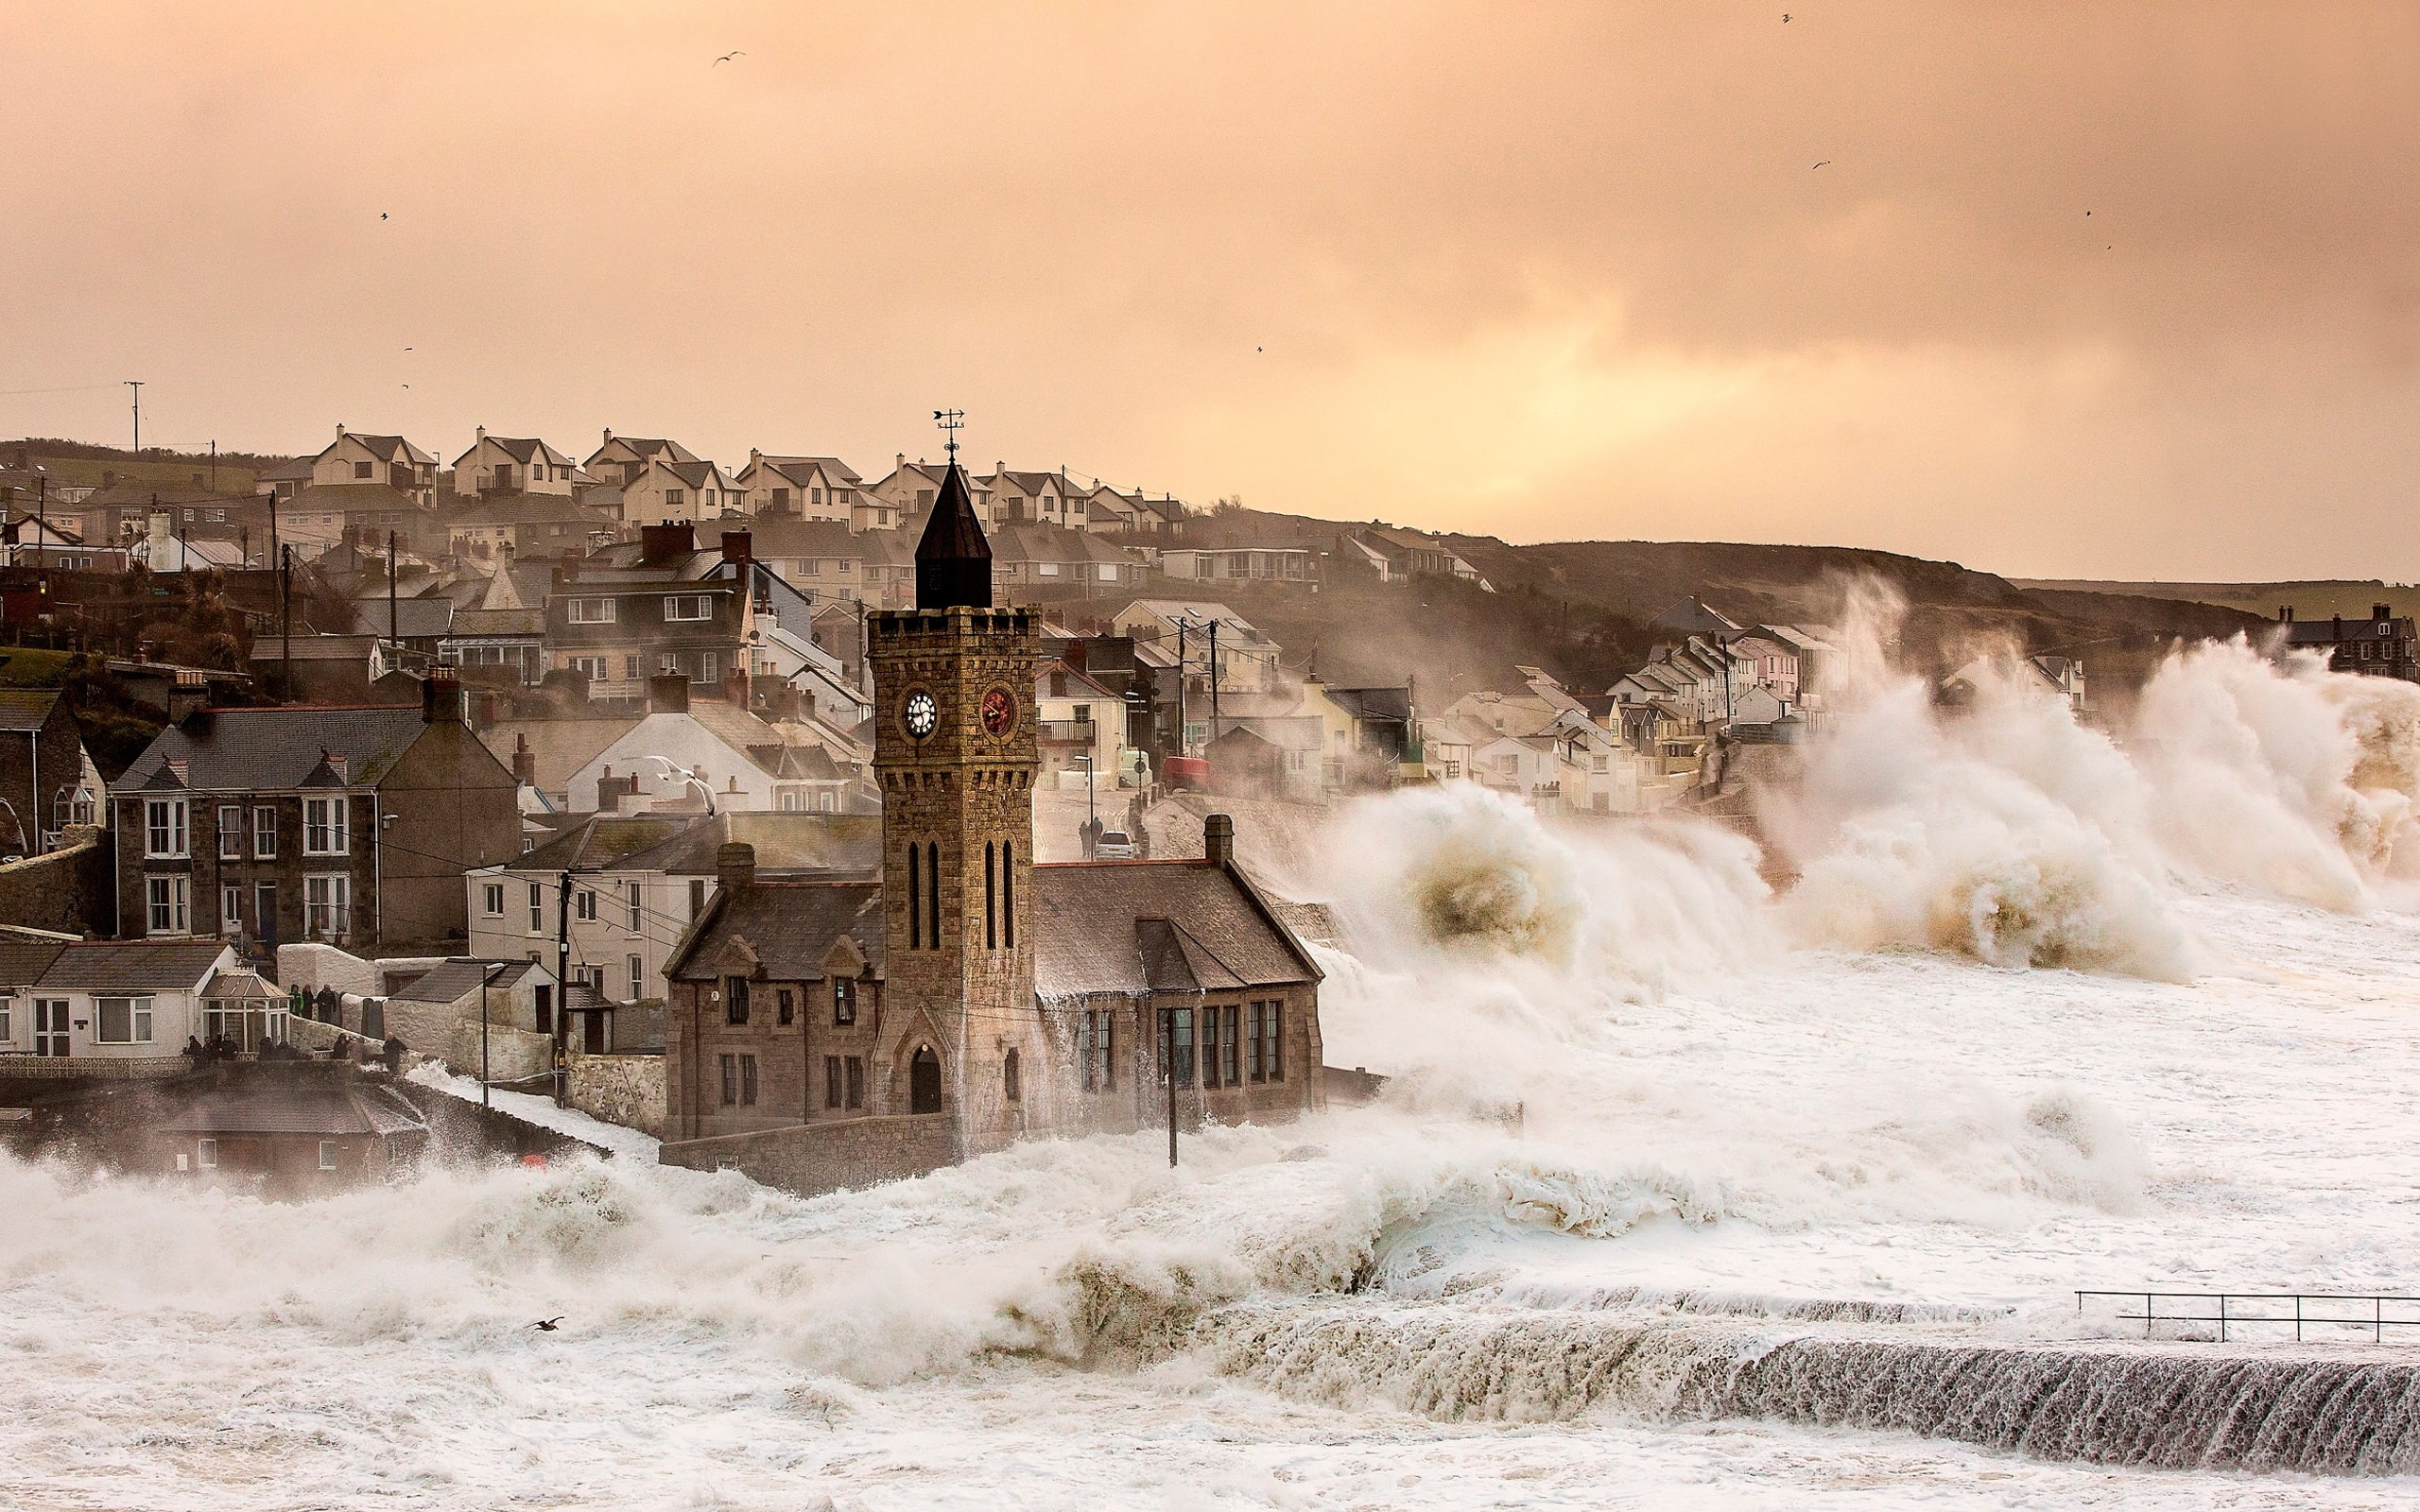 Porthleven, England, UK, houses, storm, brown structure